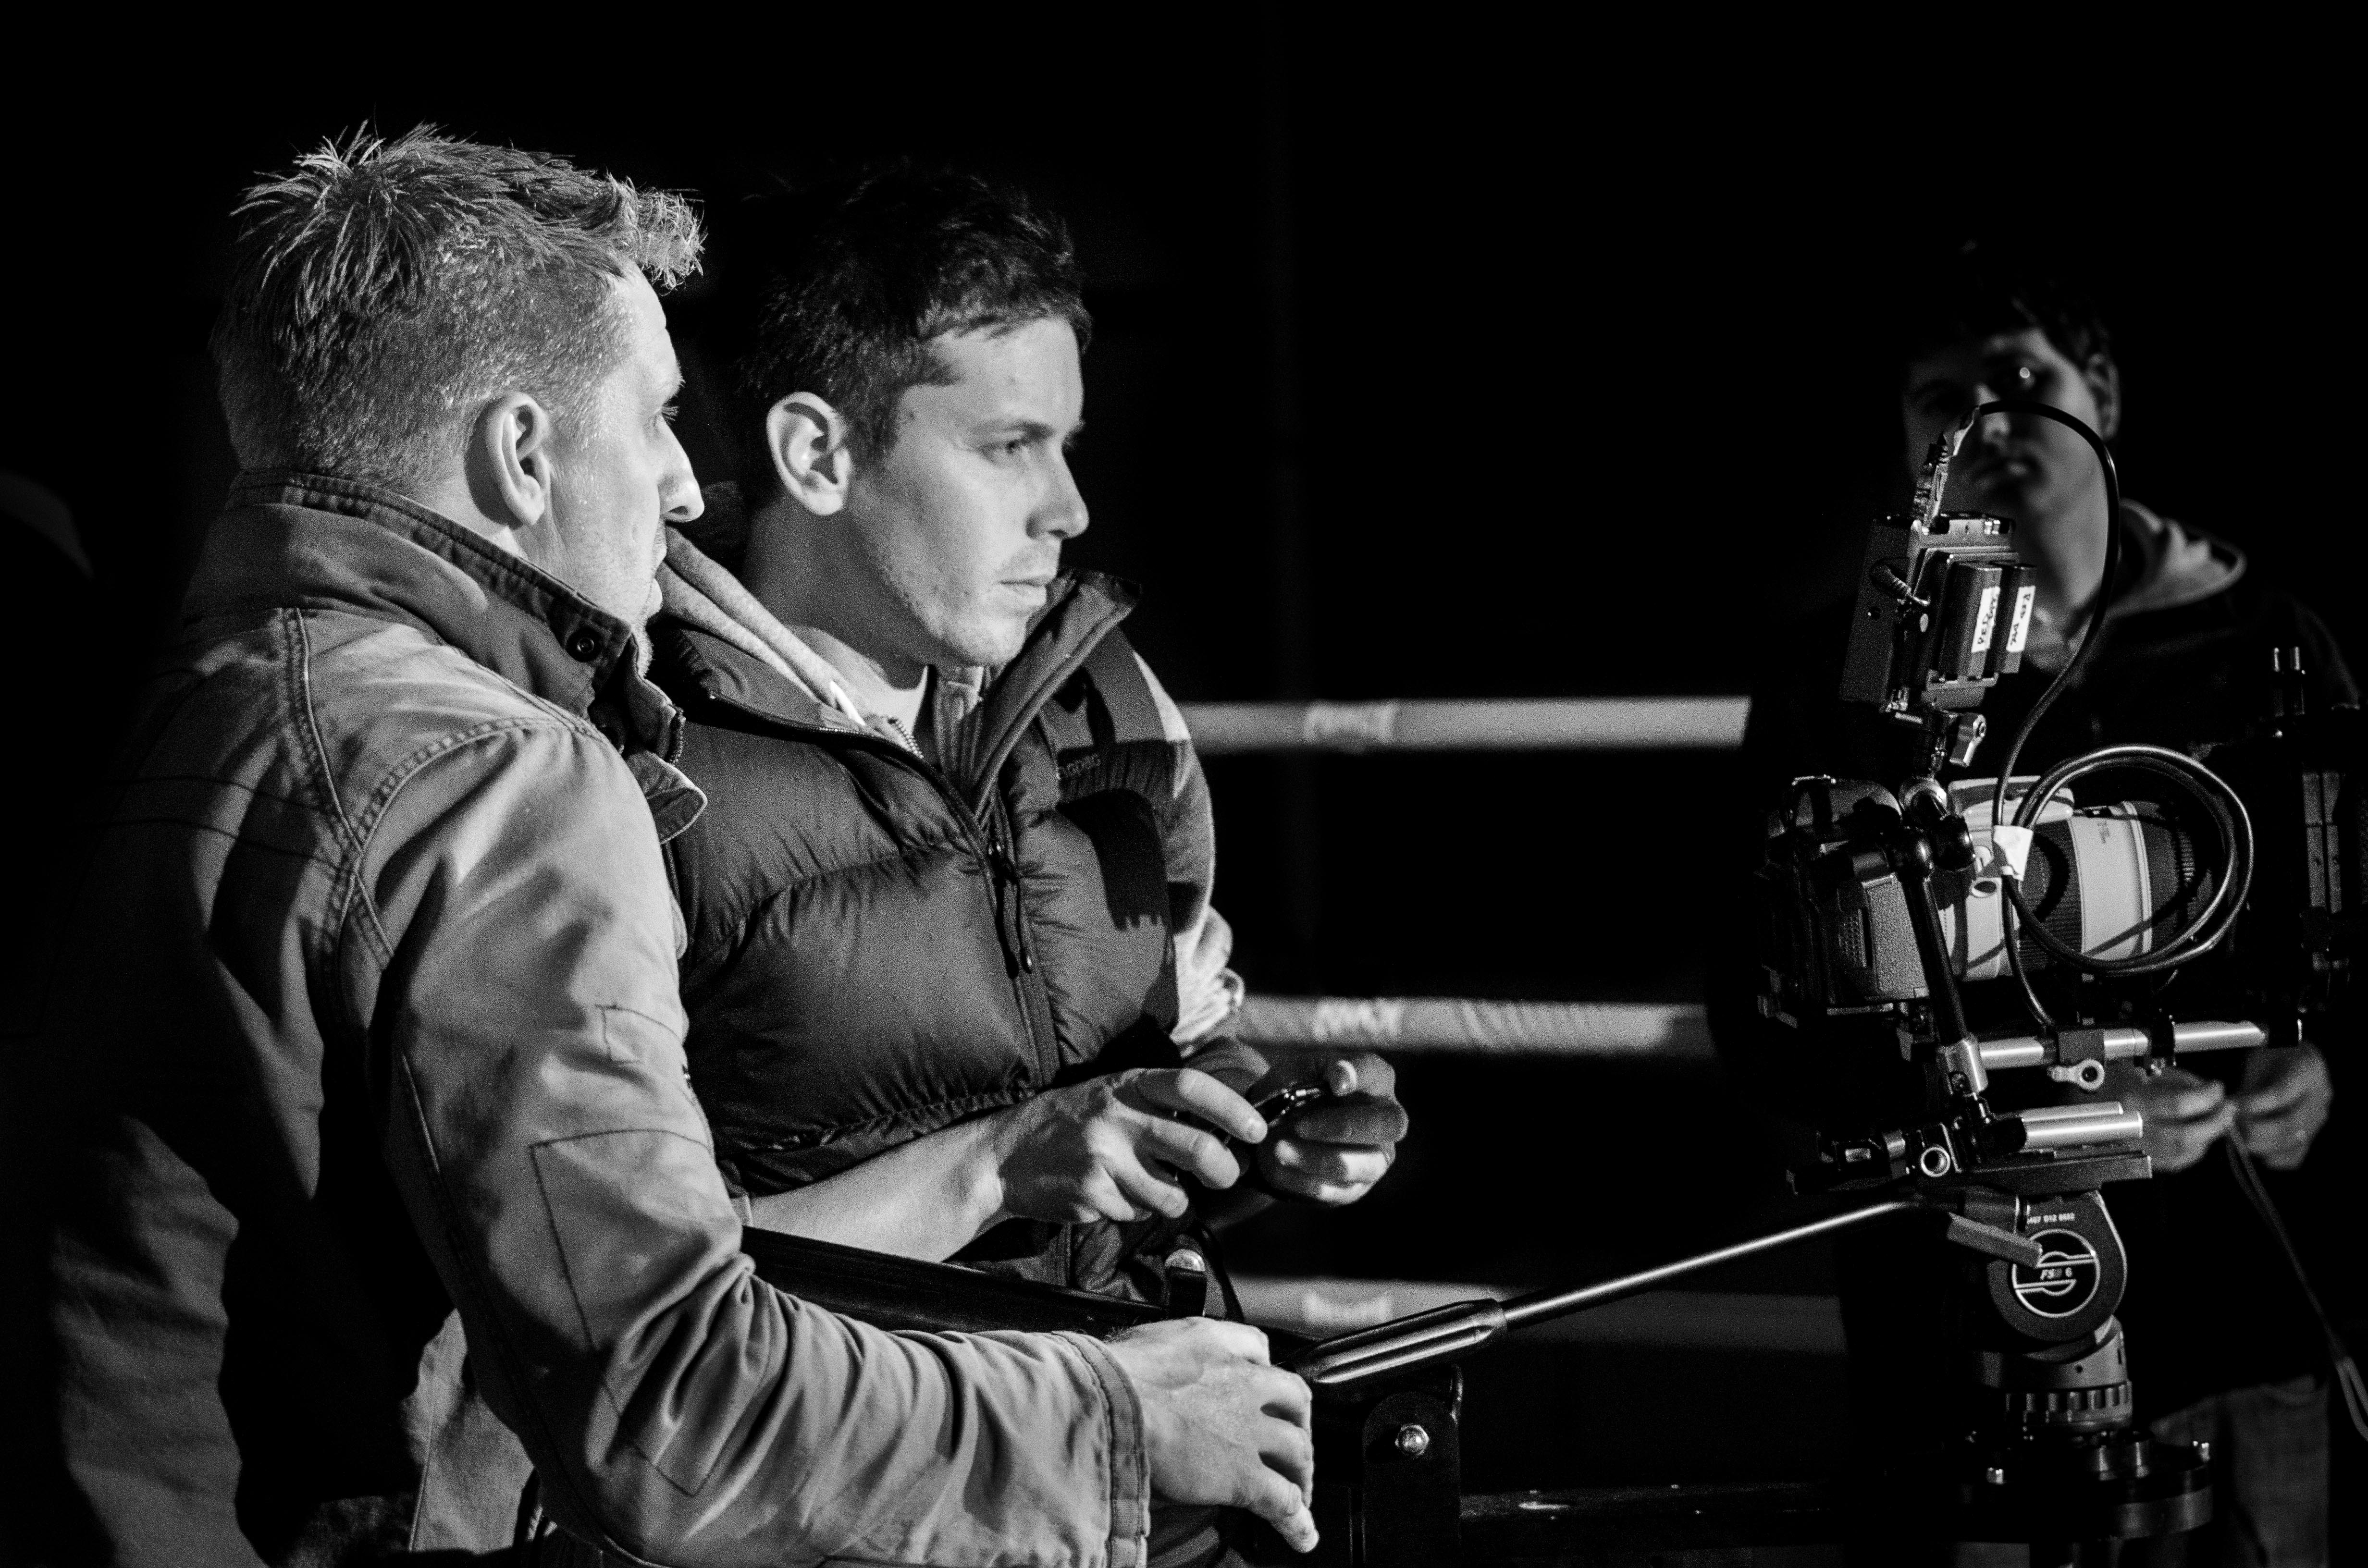 Rayner Cook and Matt Mirams on the set of Fighting Chance